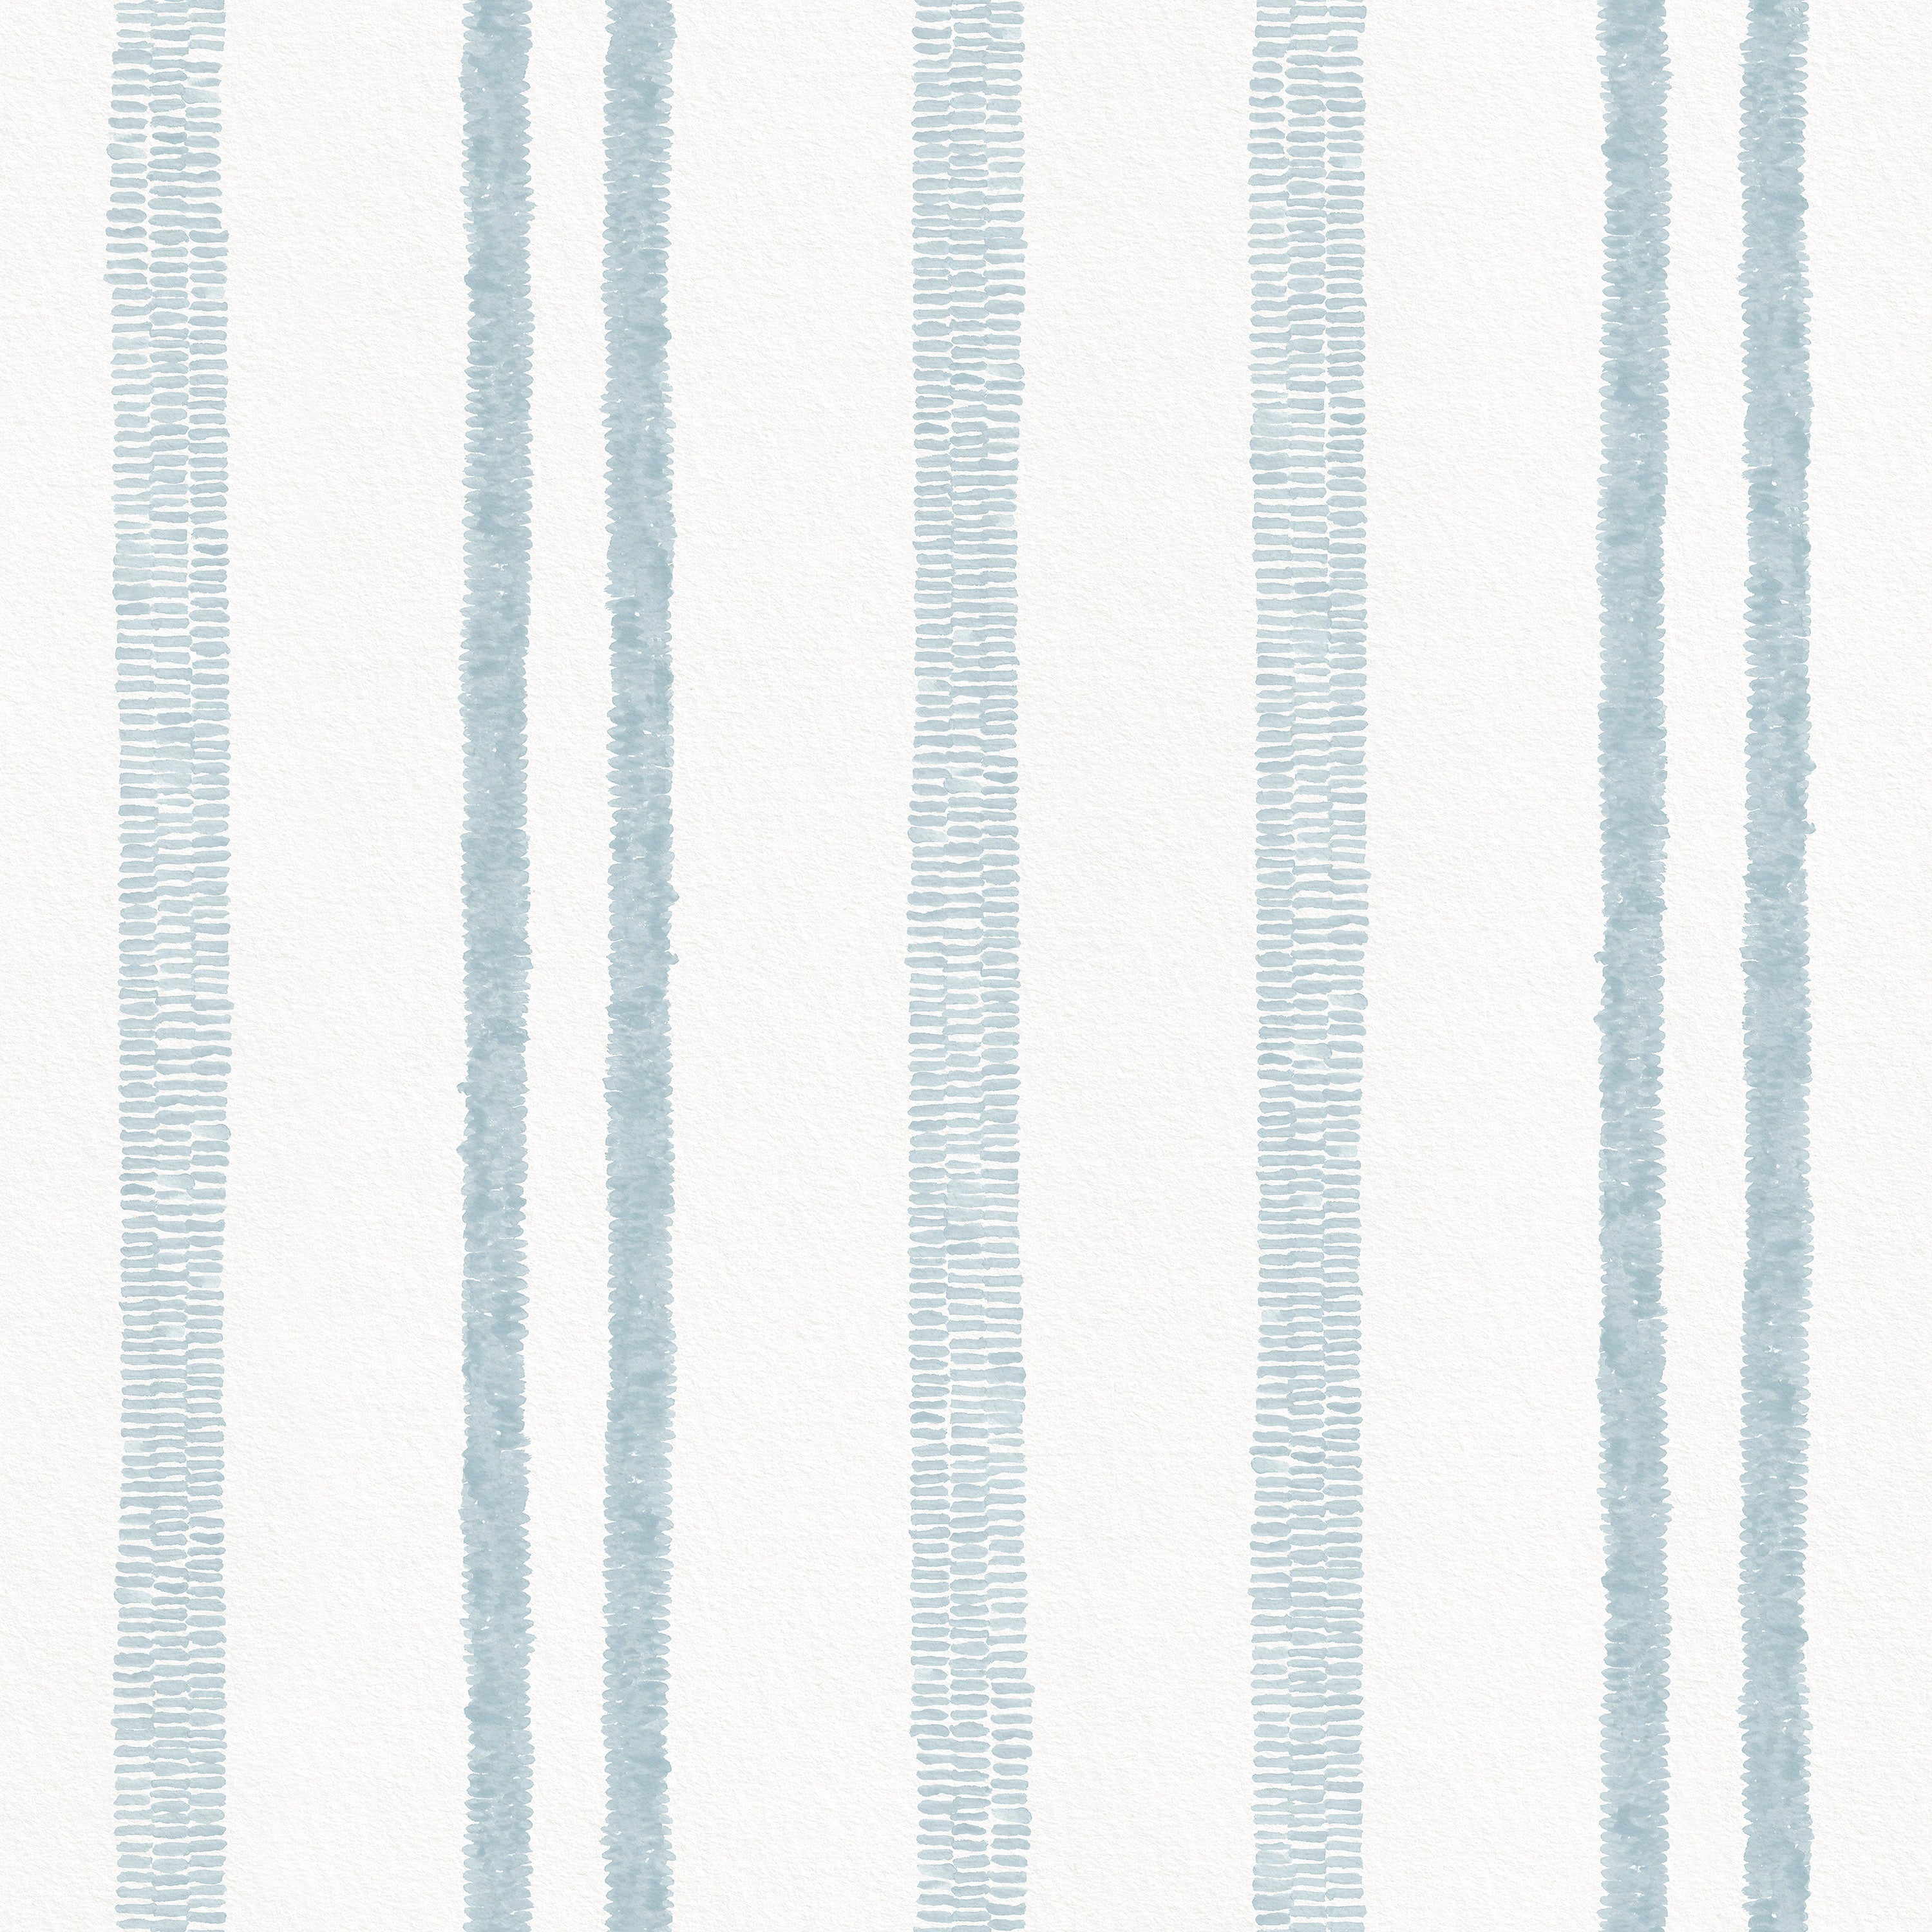 Detail of wallpaper in a textural stripe pattern in light blue on a white field.